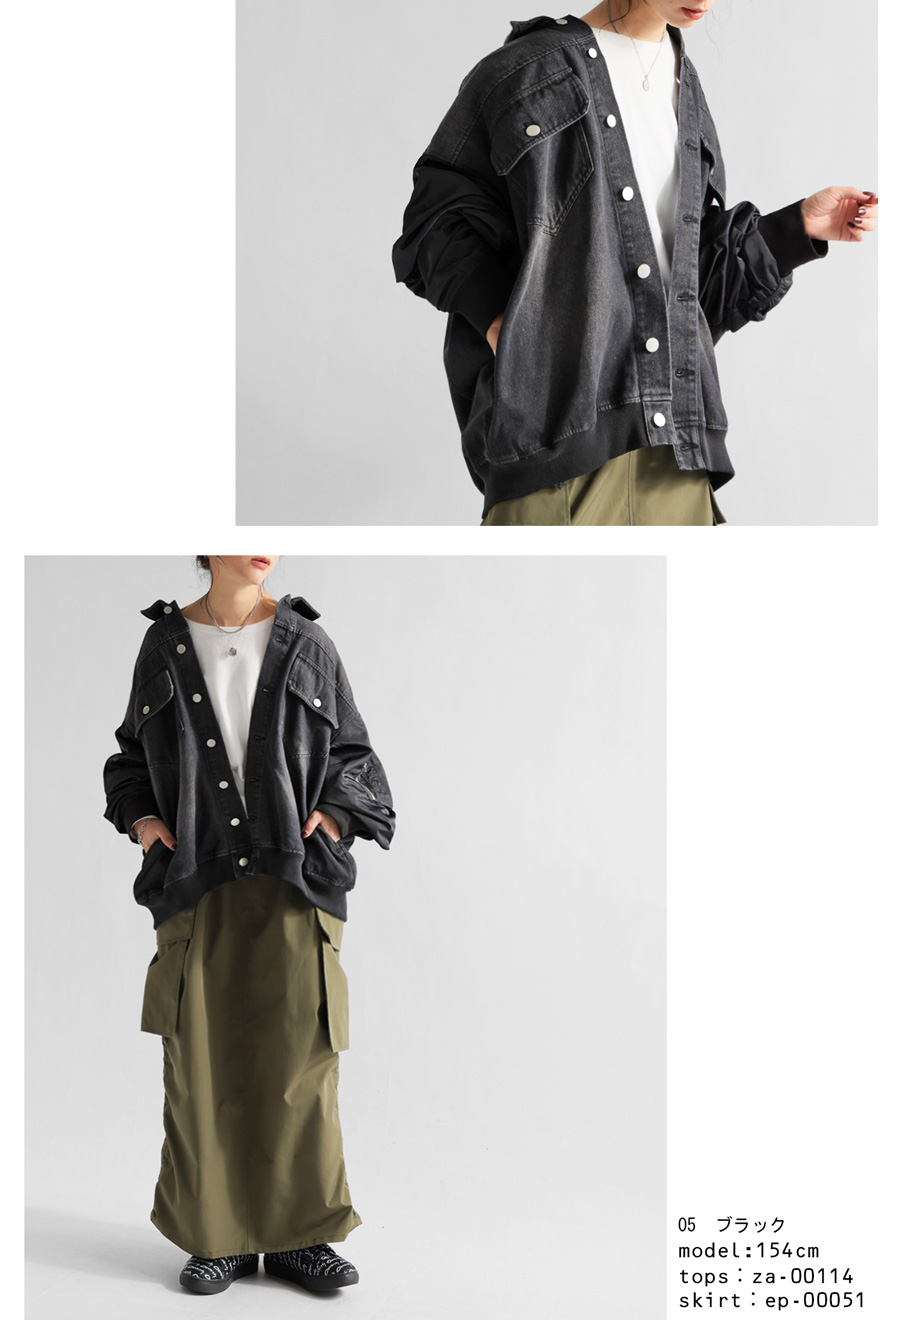 do King jacket jacket lady's outer free shipping *4 month 14 day 10 hour ~ repeated .. new color appearance mail service un- possible Mother's Day 